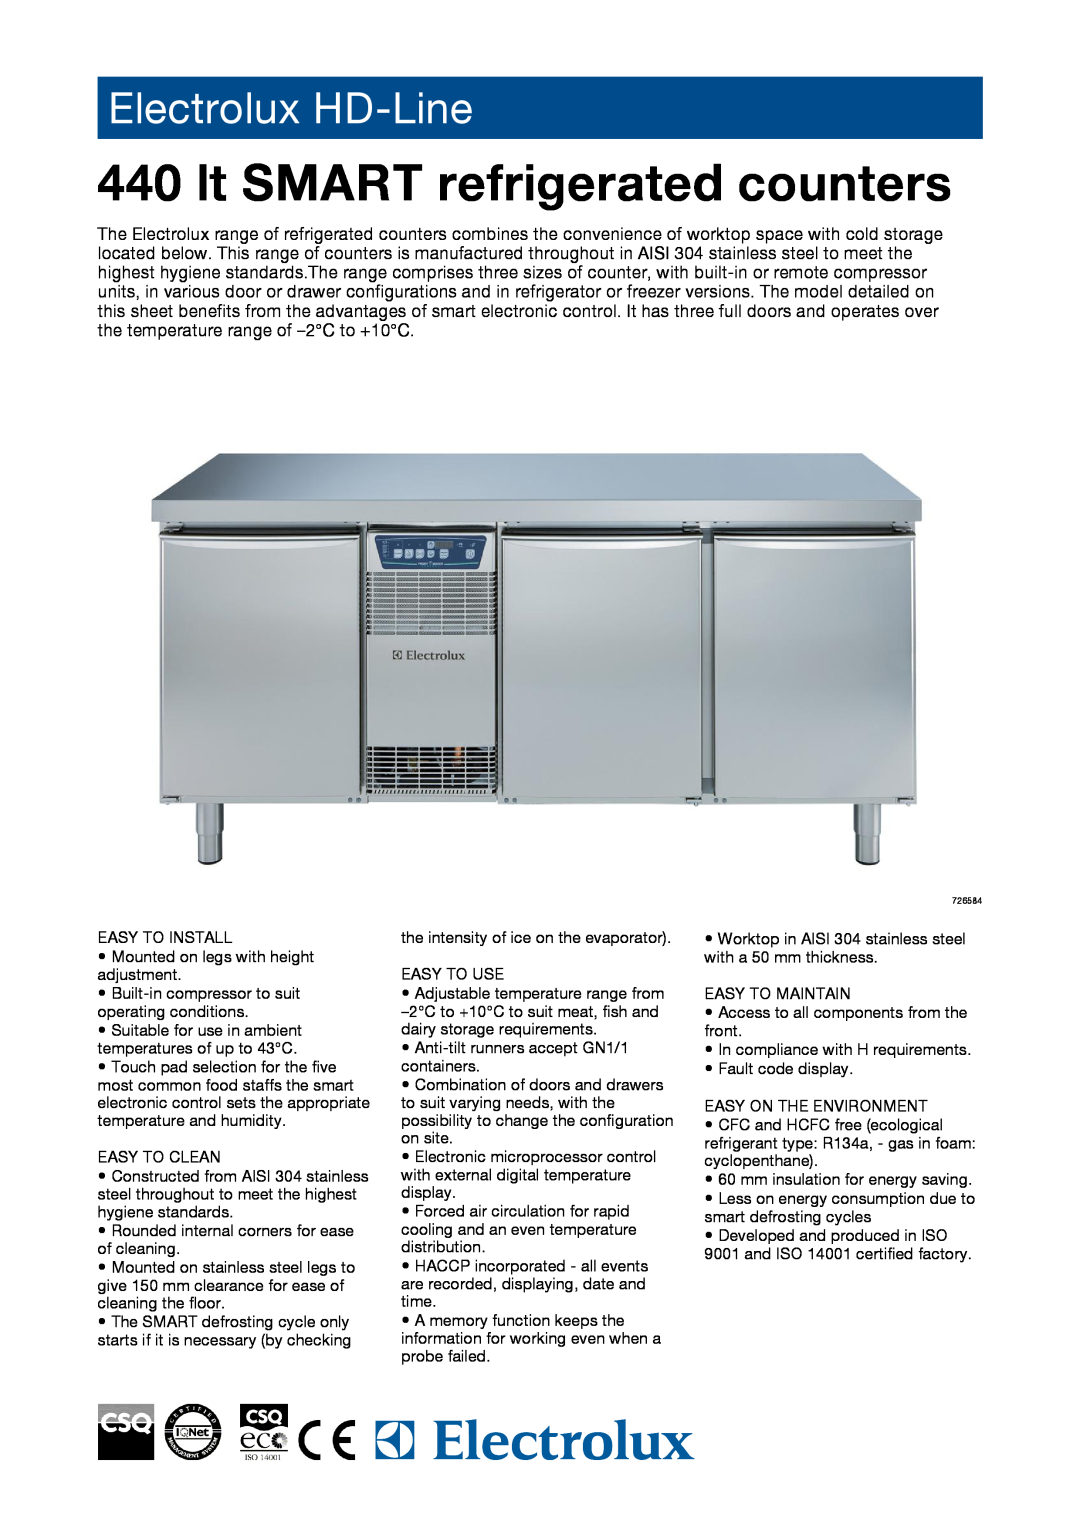 Electrolux RCER3M3, 726584 manual lt SMART refrigerated counters, Electrolux HD-Line 